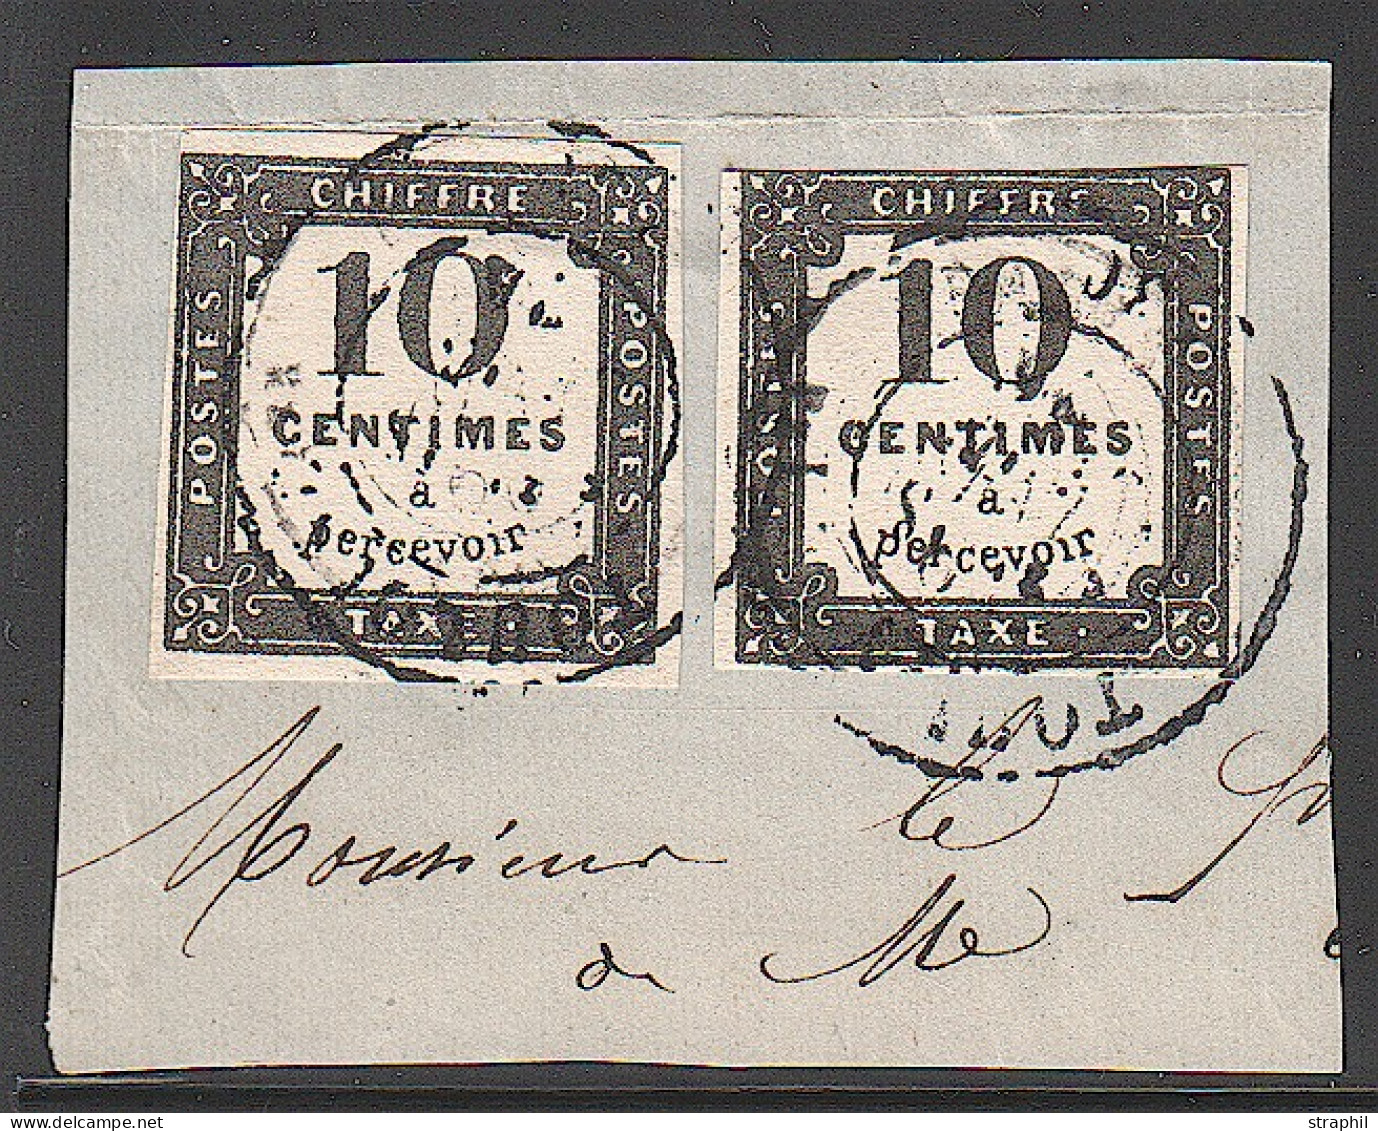 F TIMBRES TAXE - 1859-1959 Mint/hinged